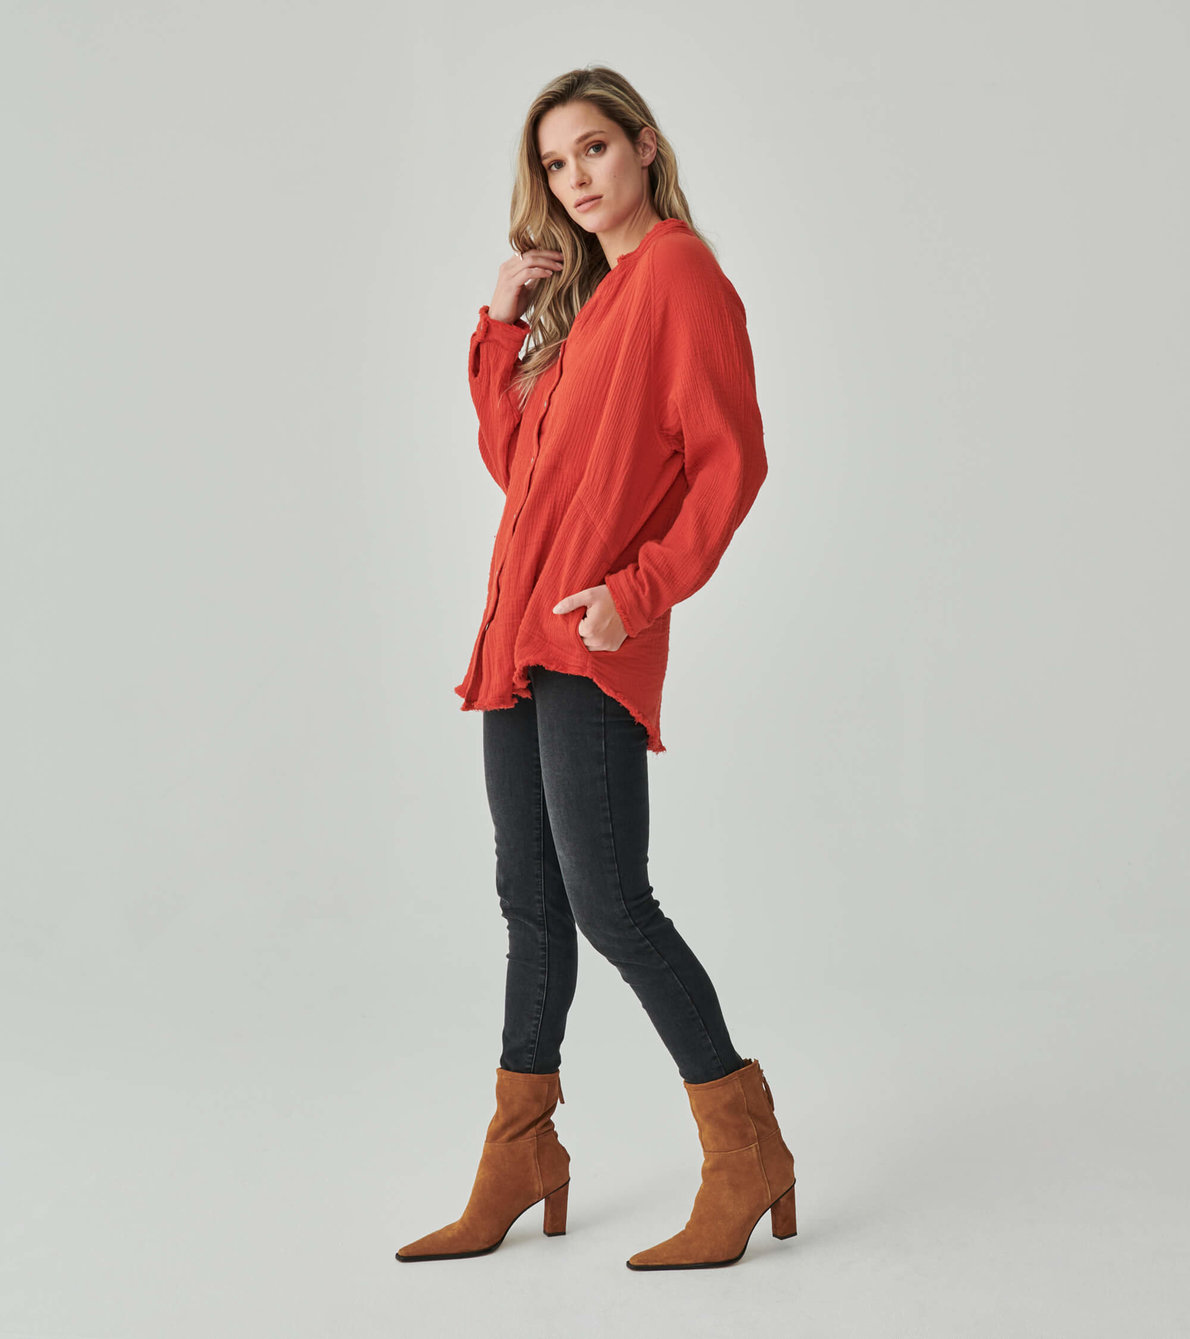 View larger image of Presley Tunic - Red Alert